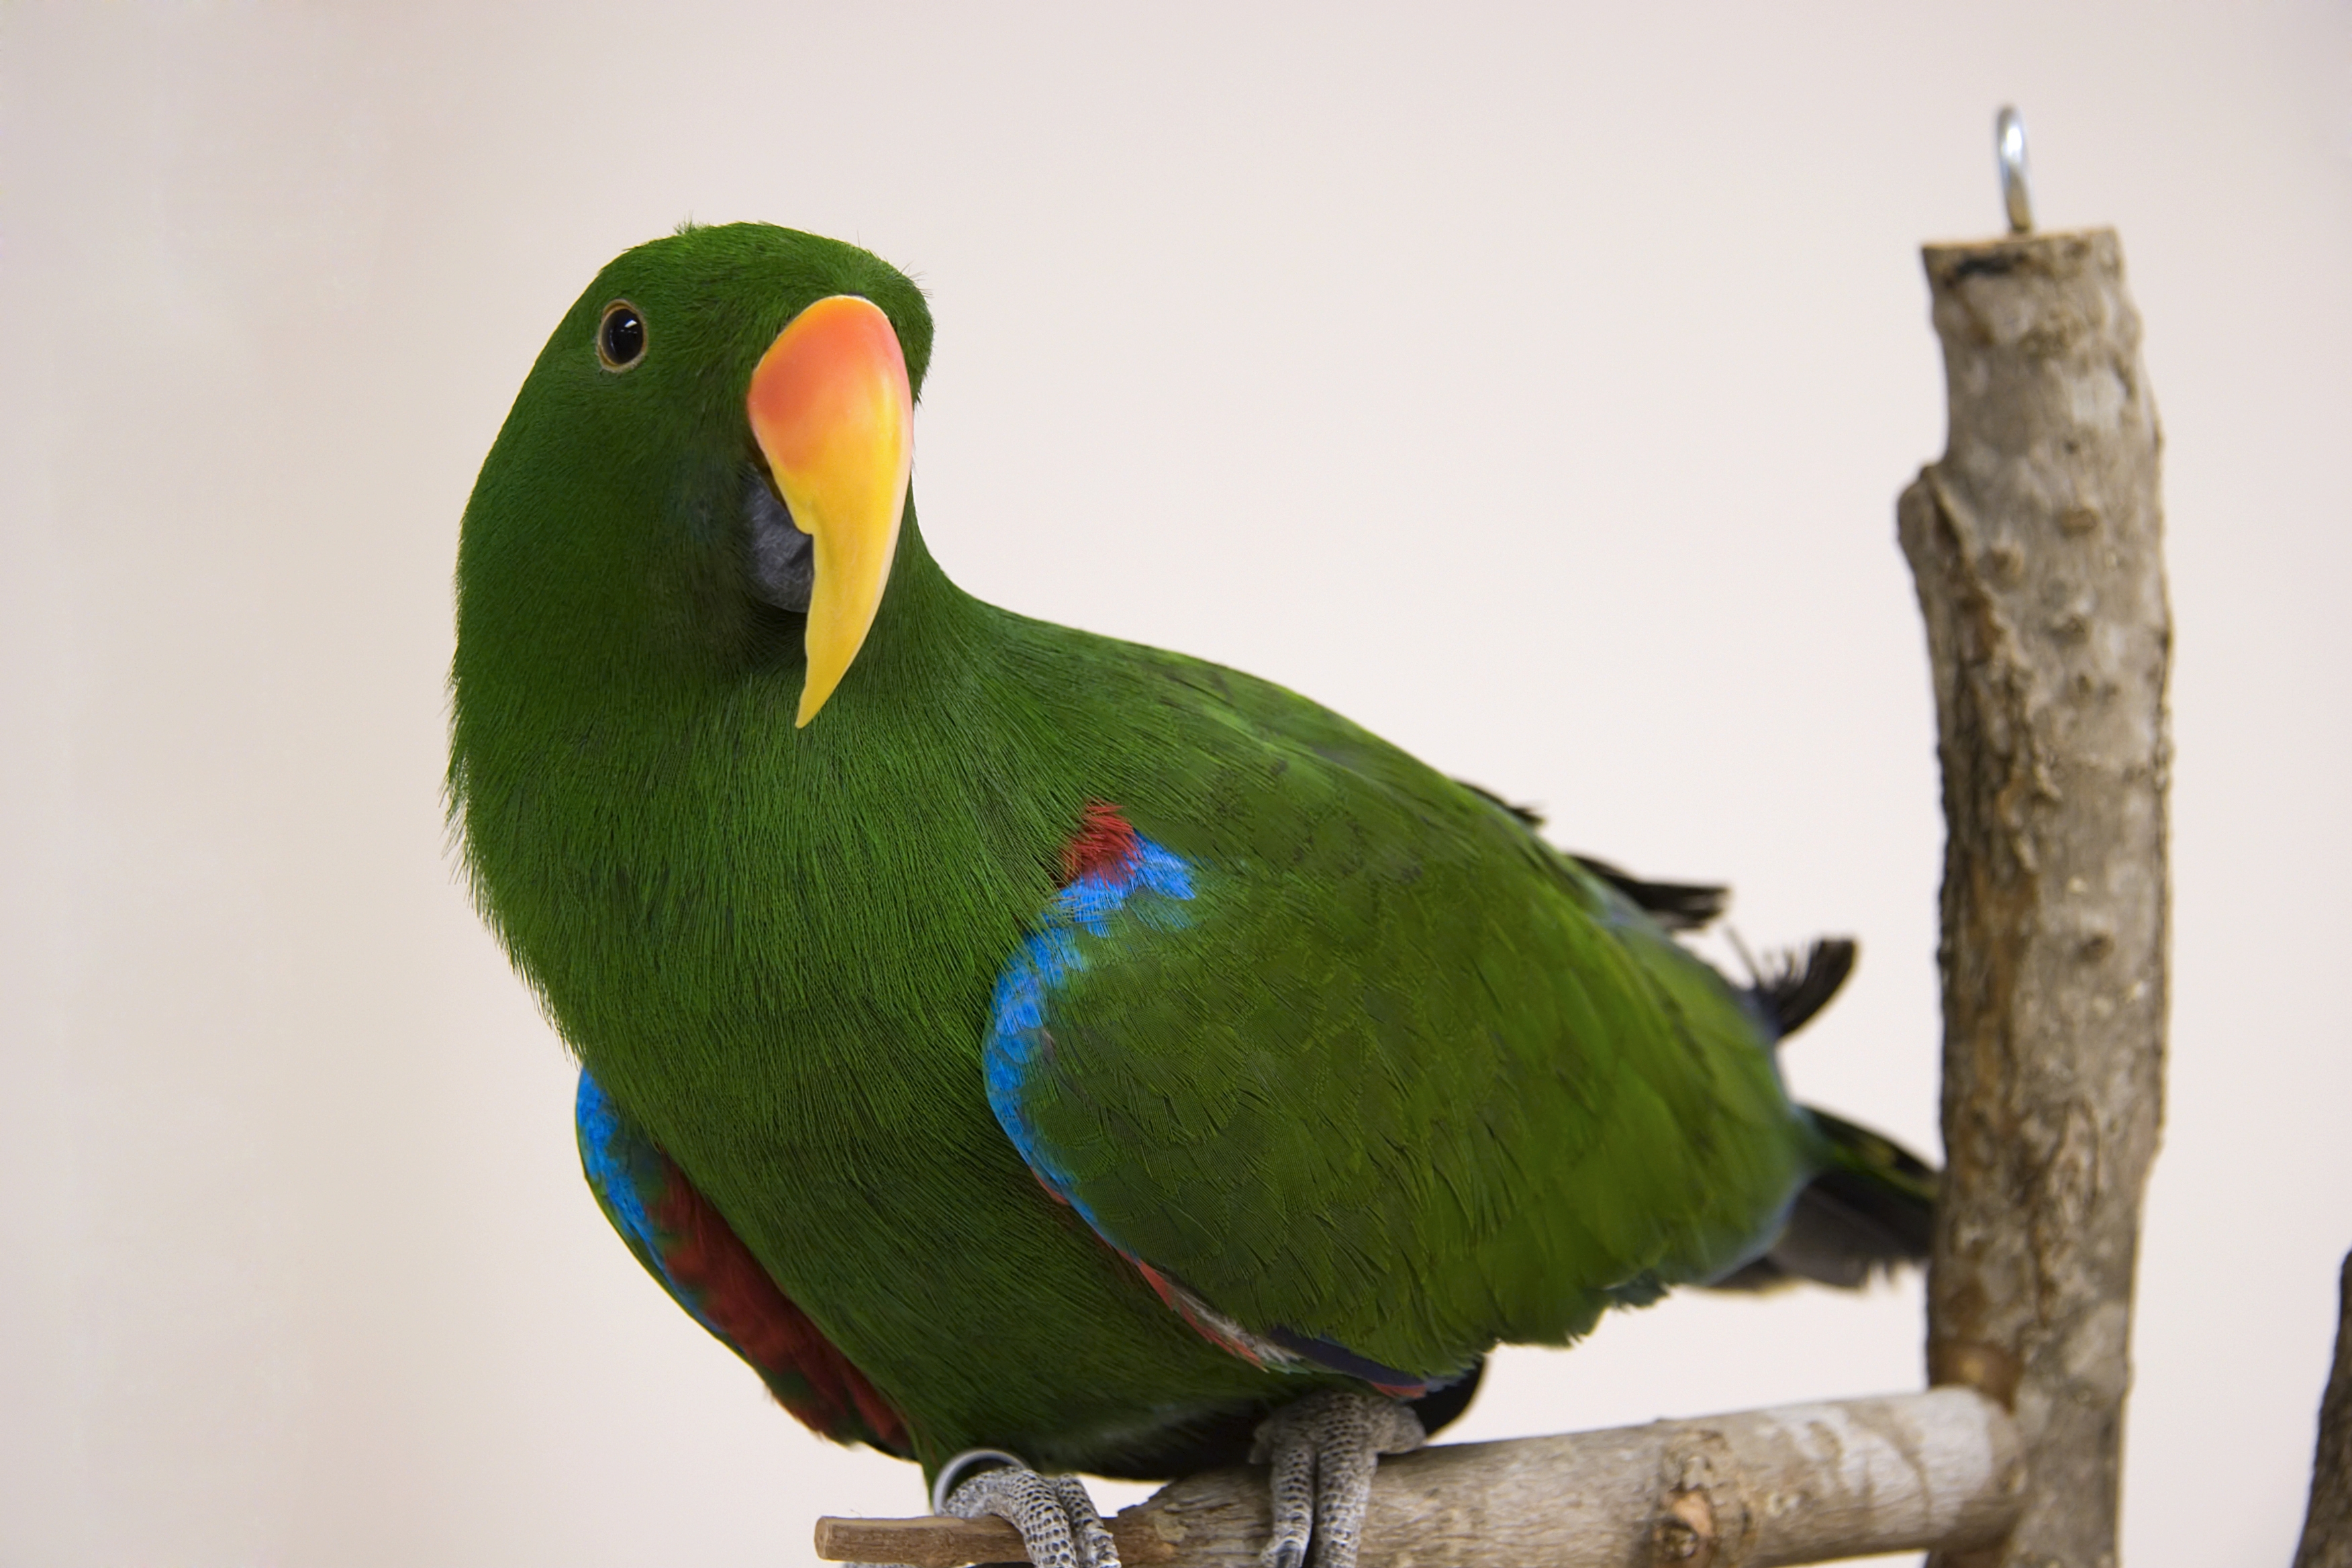 Electus Parrot, native to the Soloman Islands